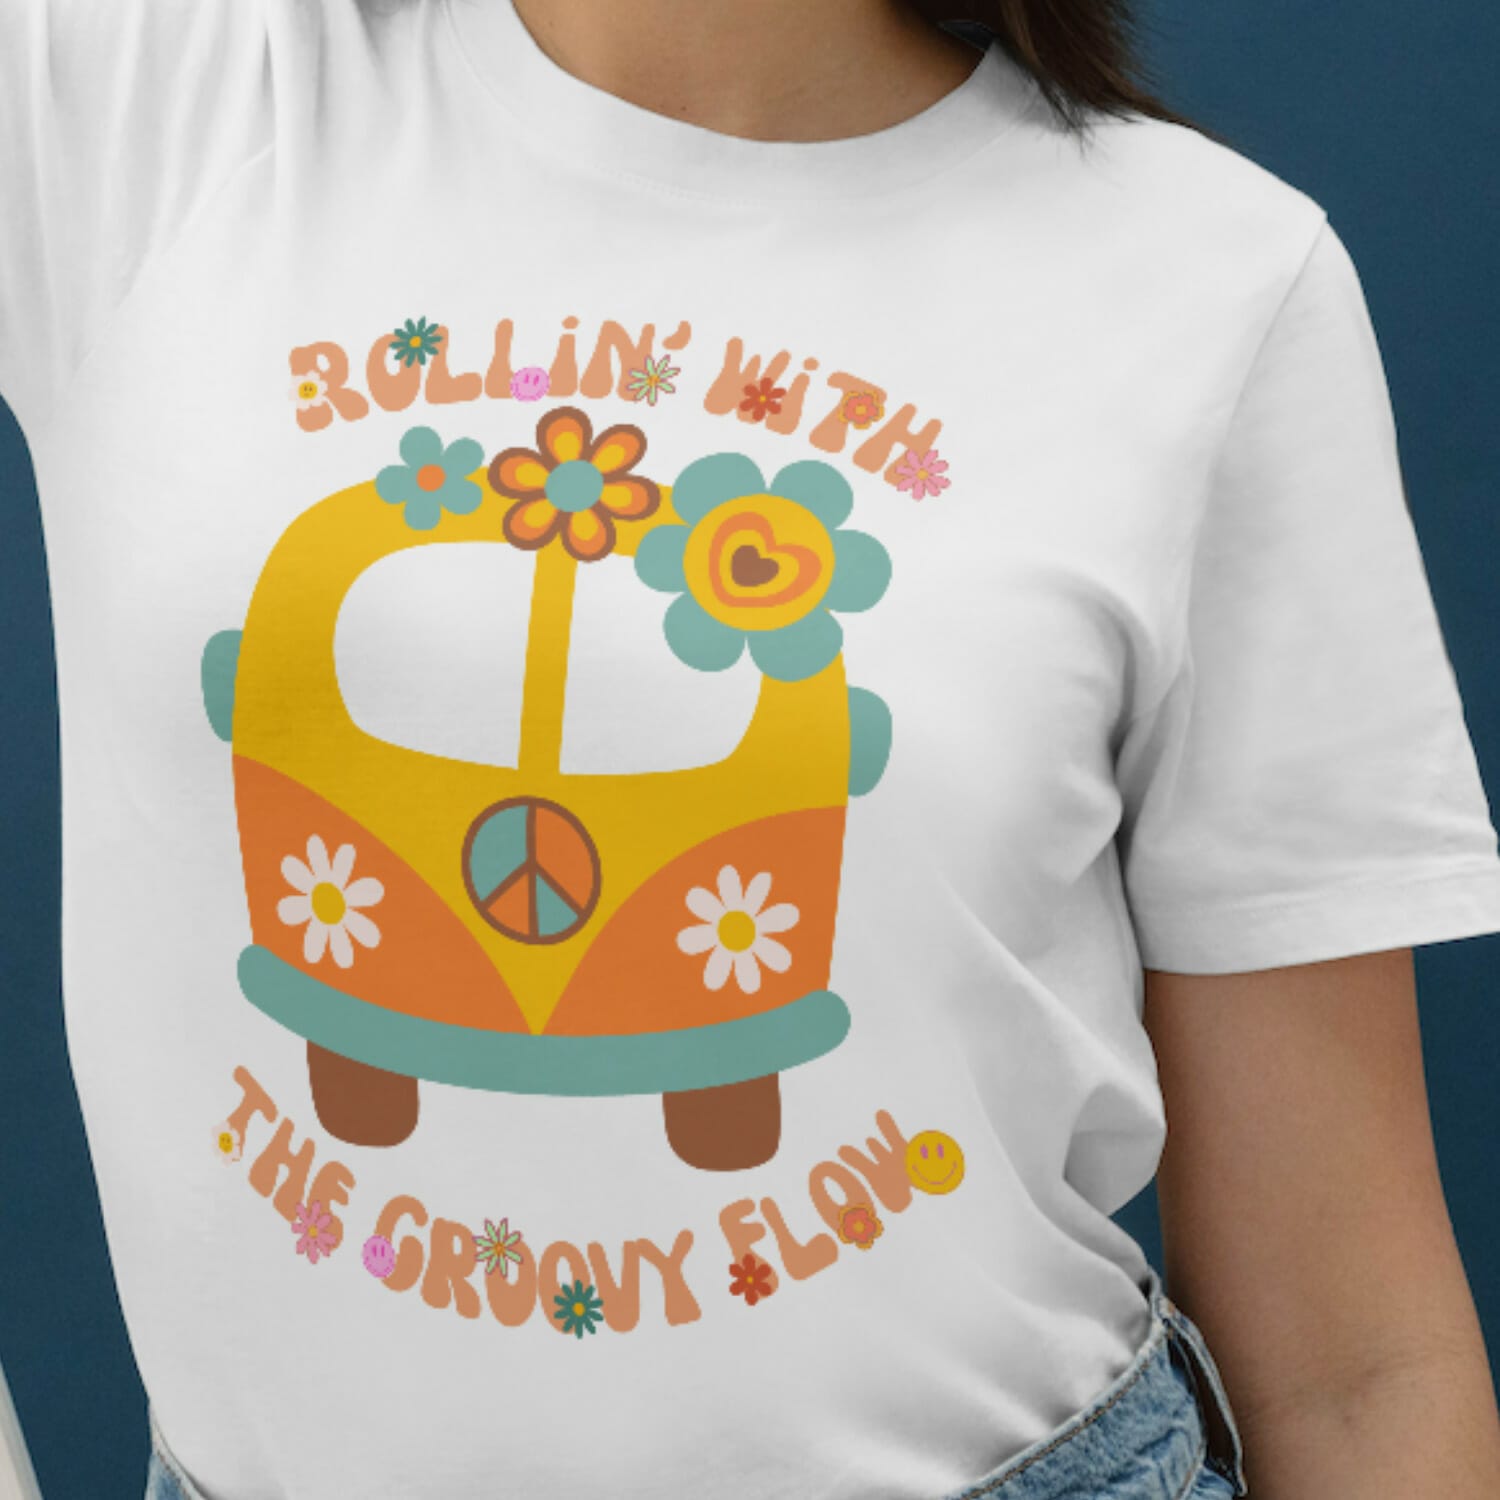 Rollin with the groovy flow Tshirt Design